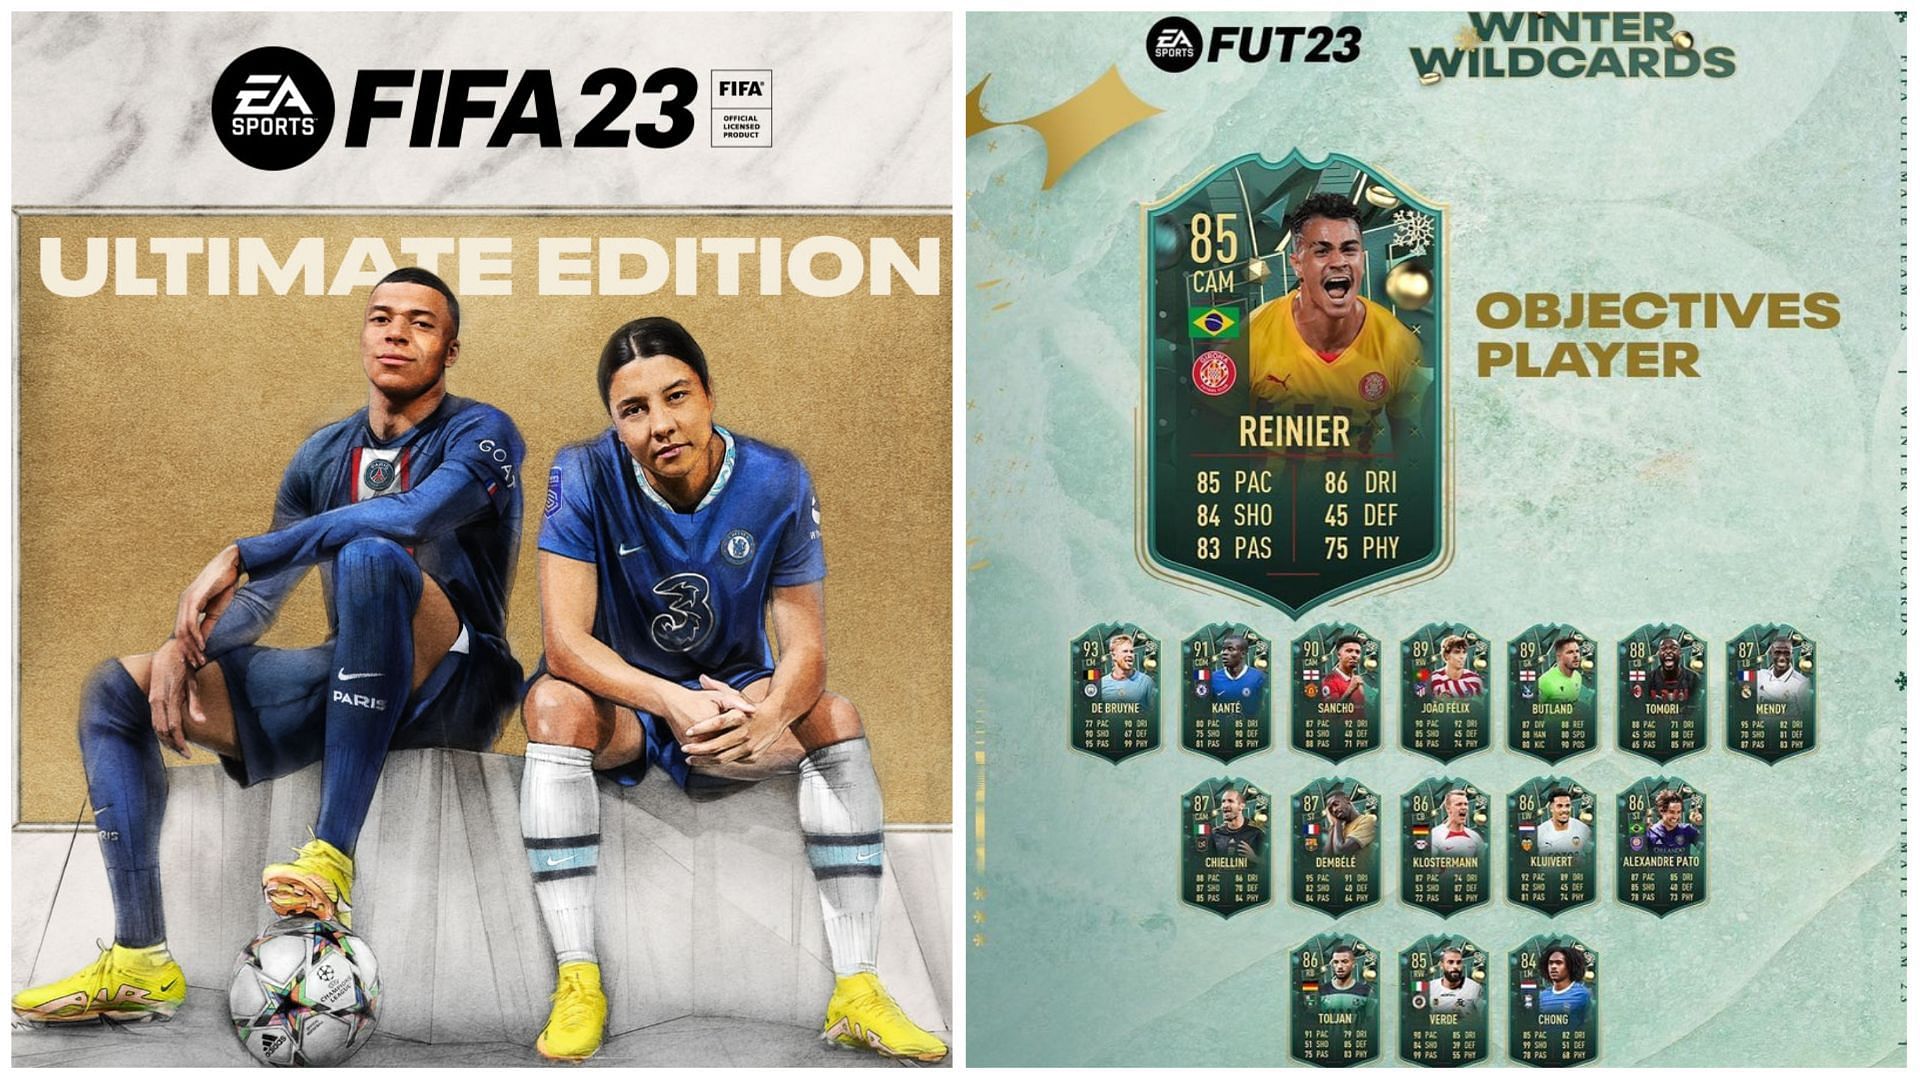 Reinier has received an objective card in FIFA 23 (Images via EA Sports)